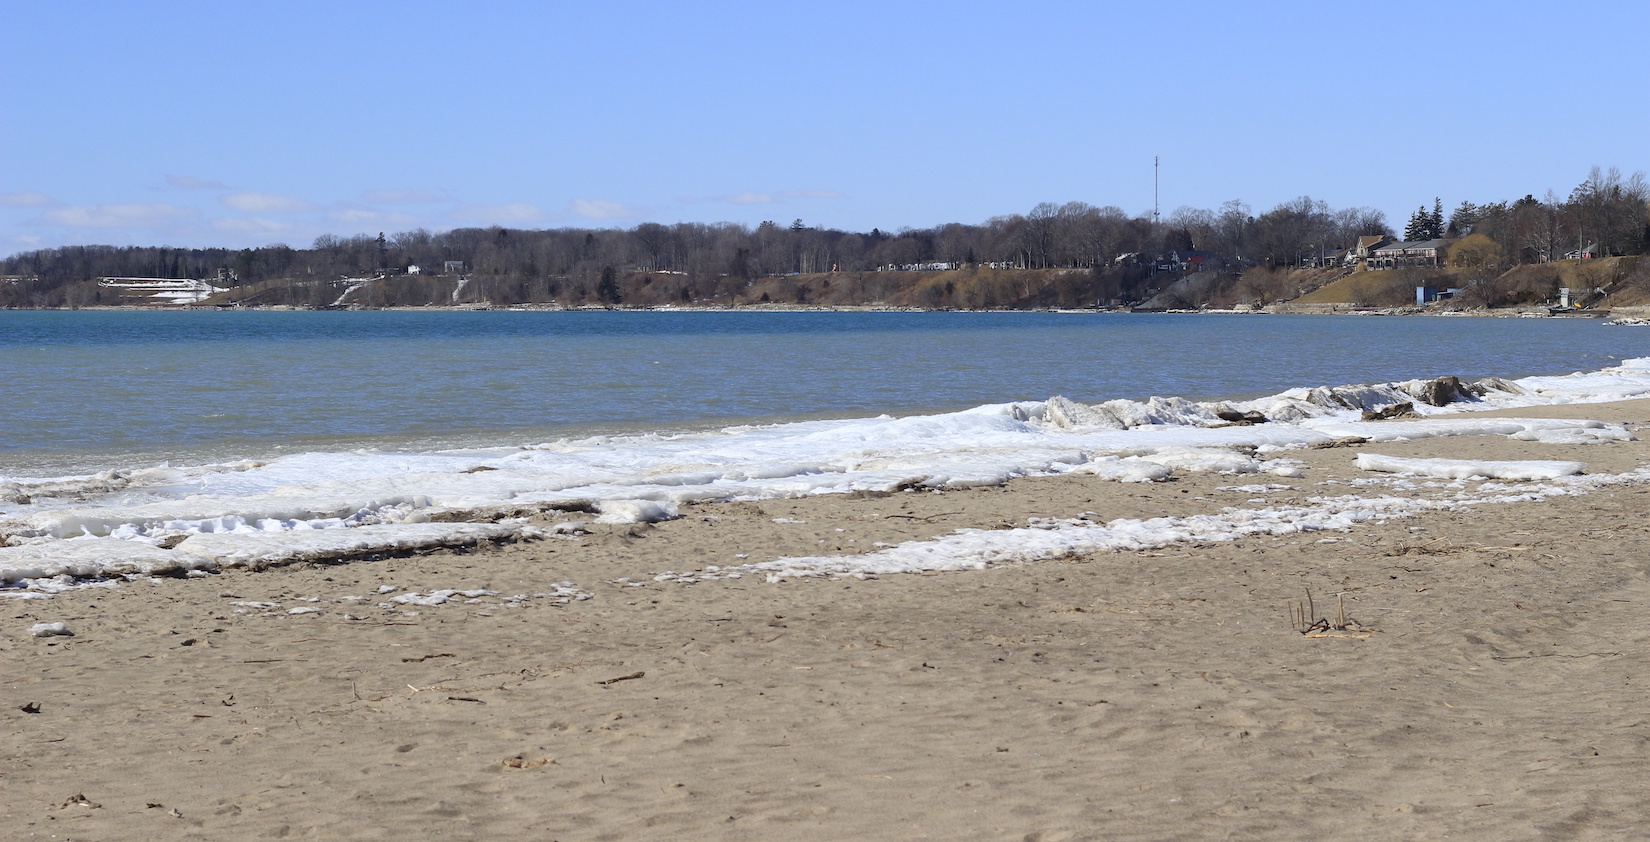 Waves arriving on the sand of Port Dover Beach